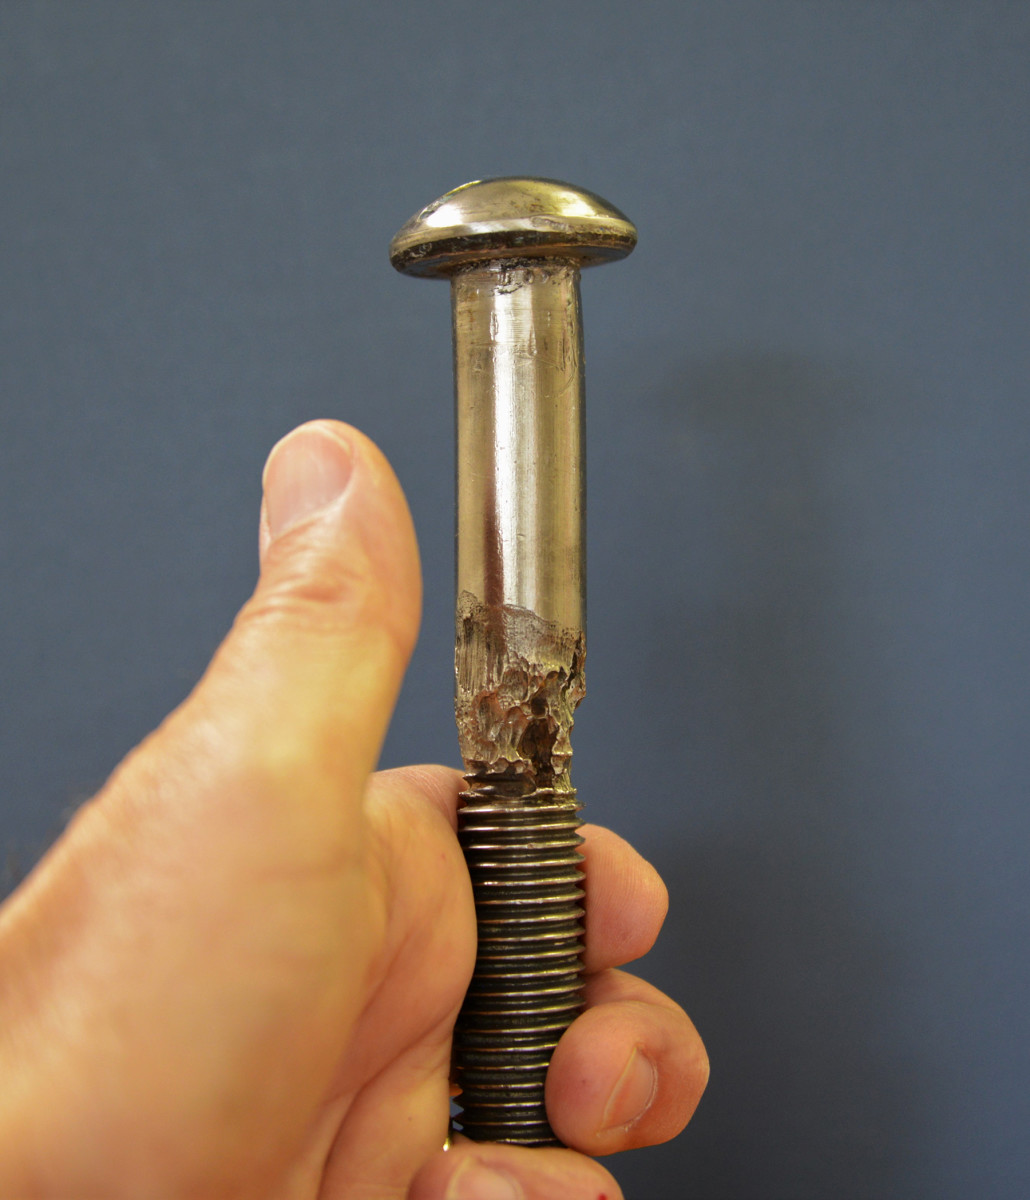 This stainless machine screw held a shaft strut in place. It held up well, except in the area starved of oxygen. Though not stamped 316, this fastener is non-magnetic.